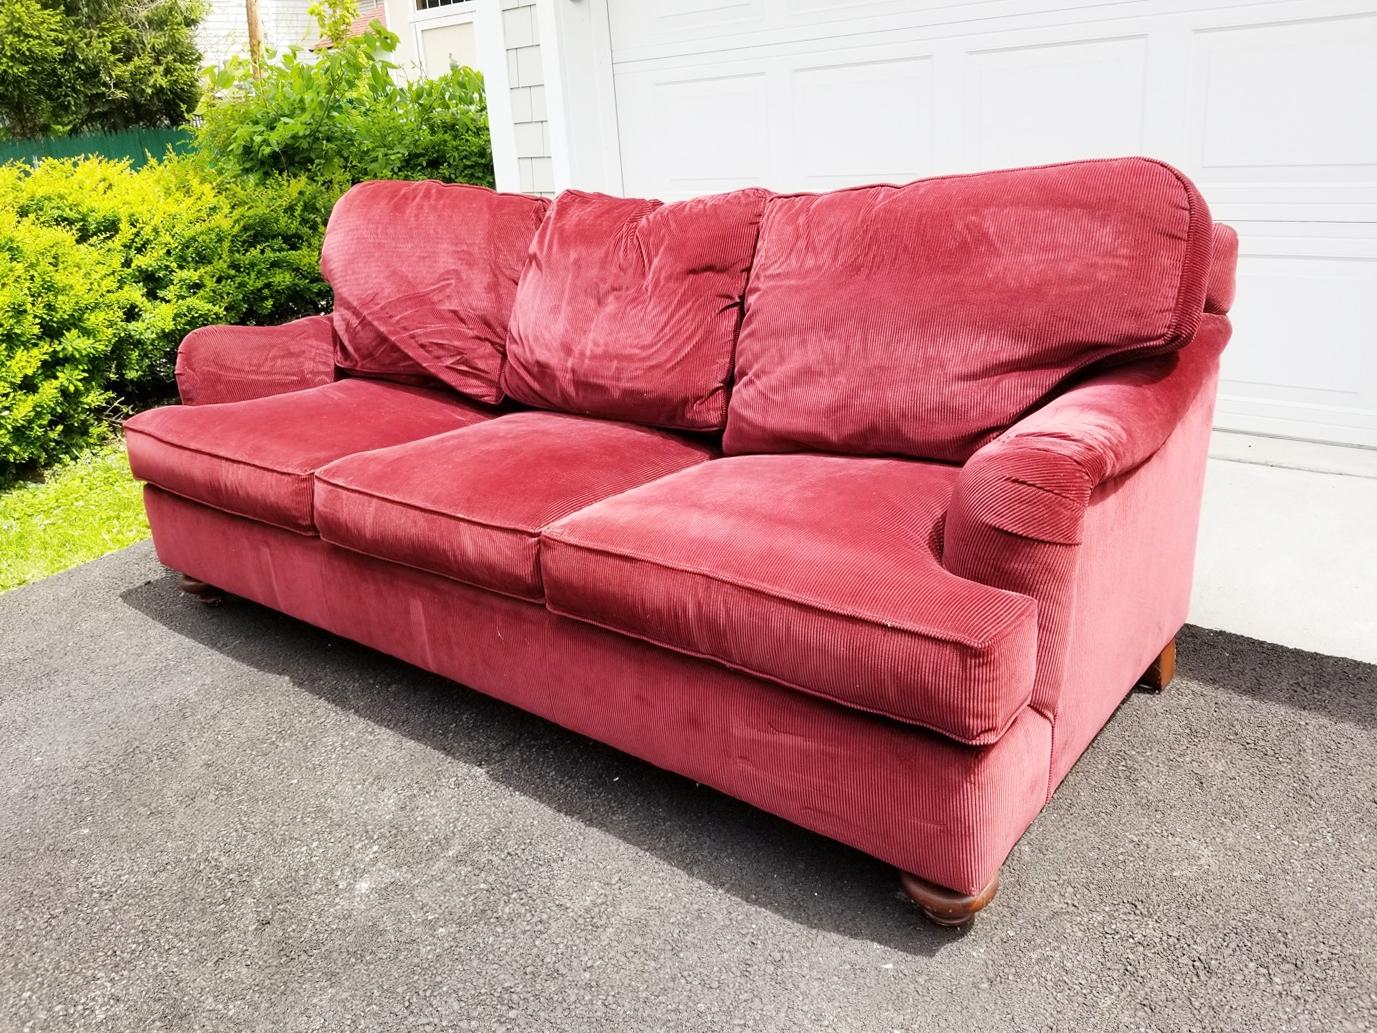 red corduroy couch